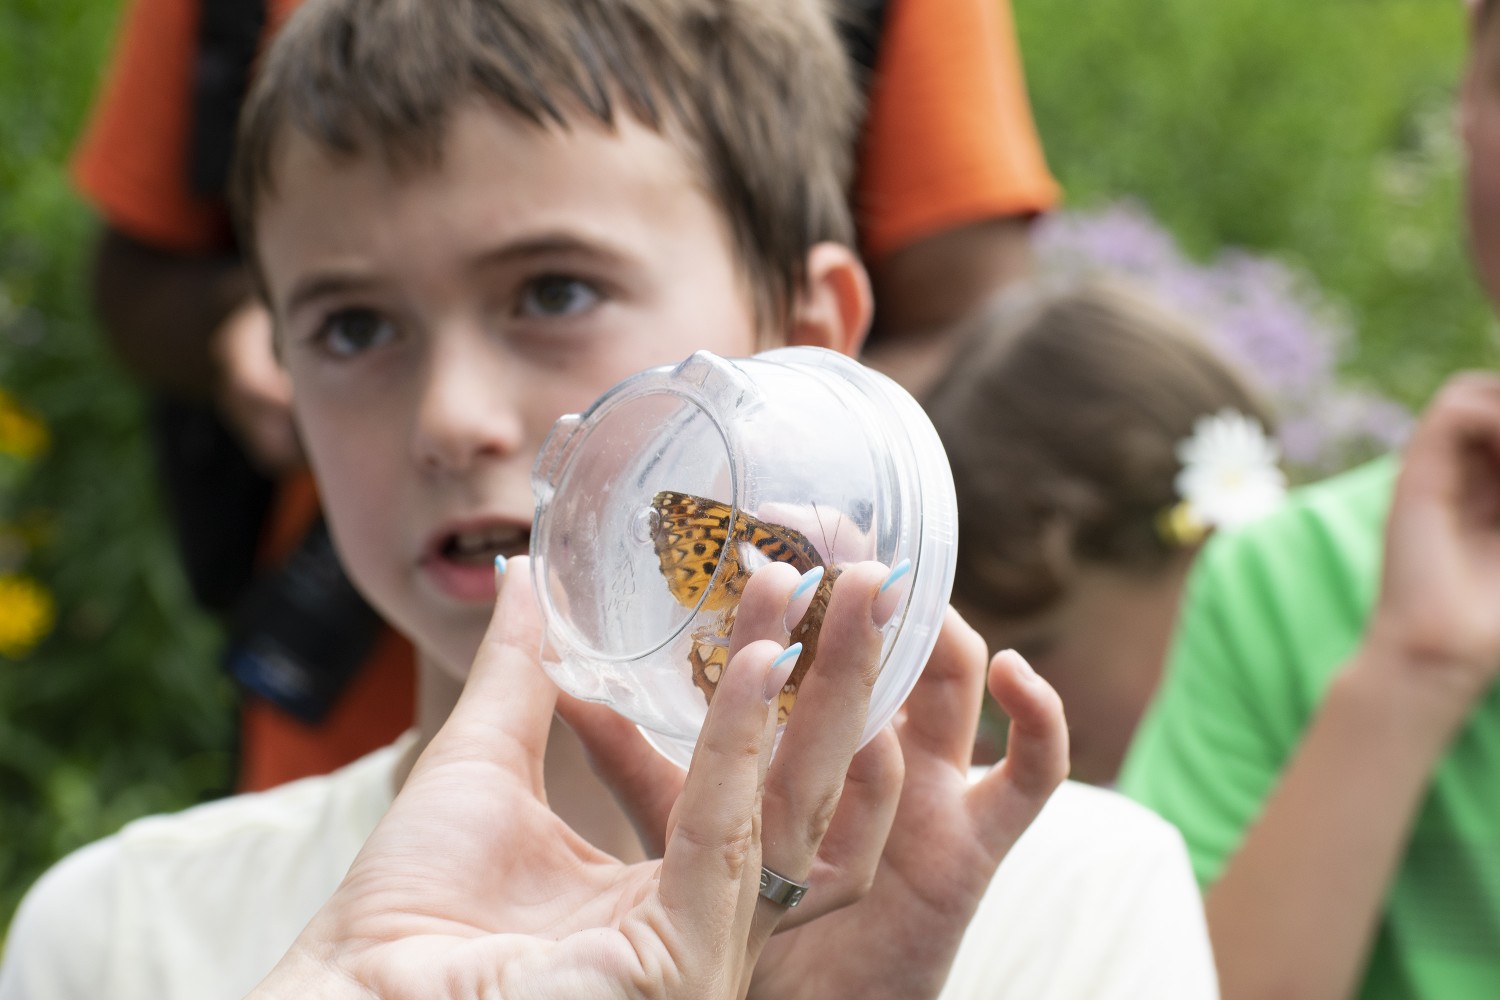 Can outdoor learning create the next generation of eco-warriors?